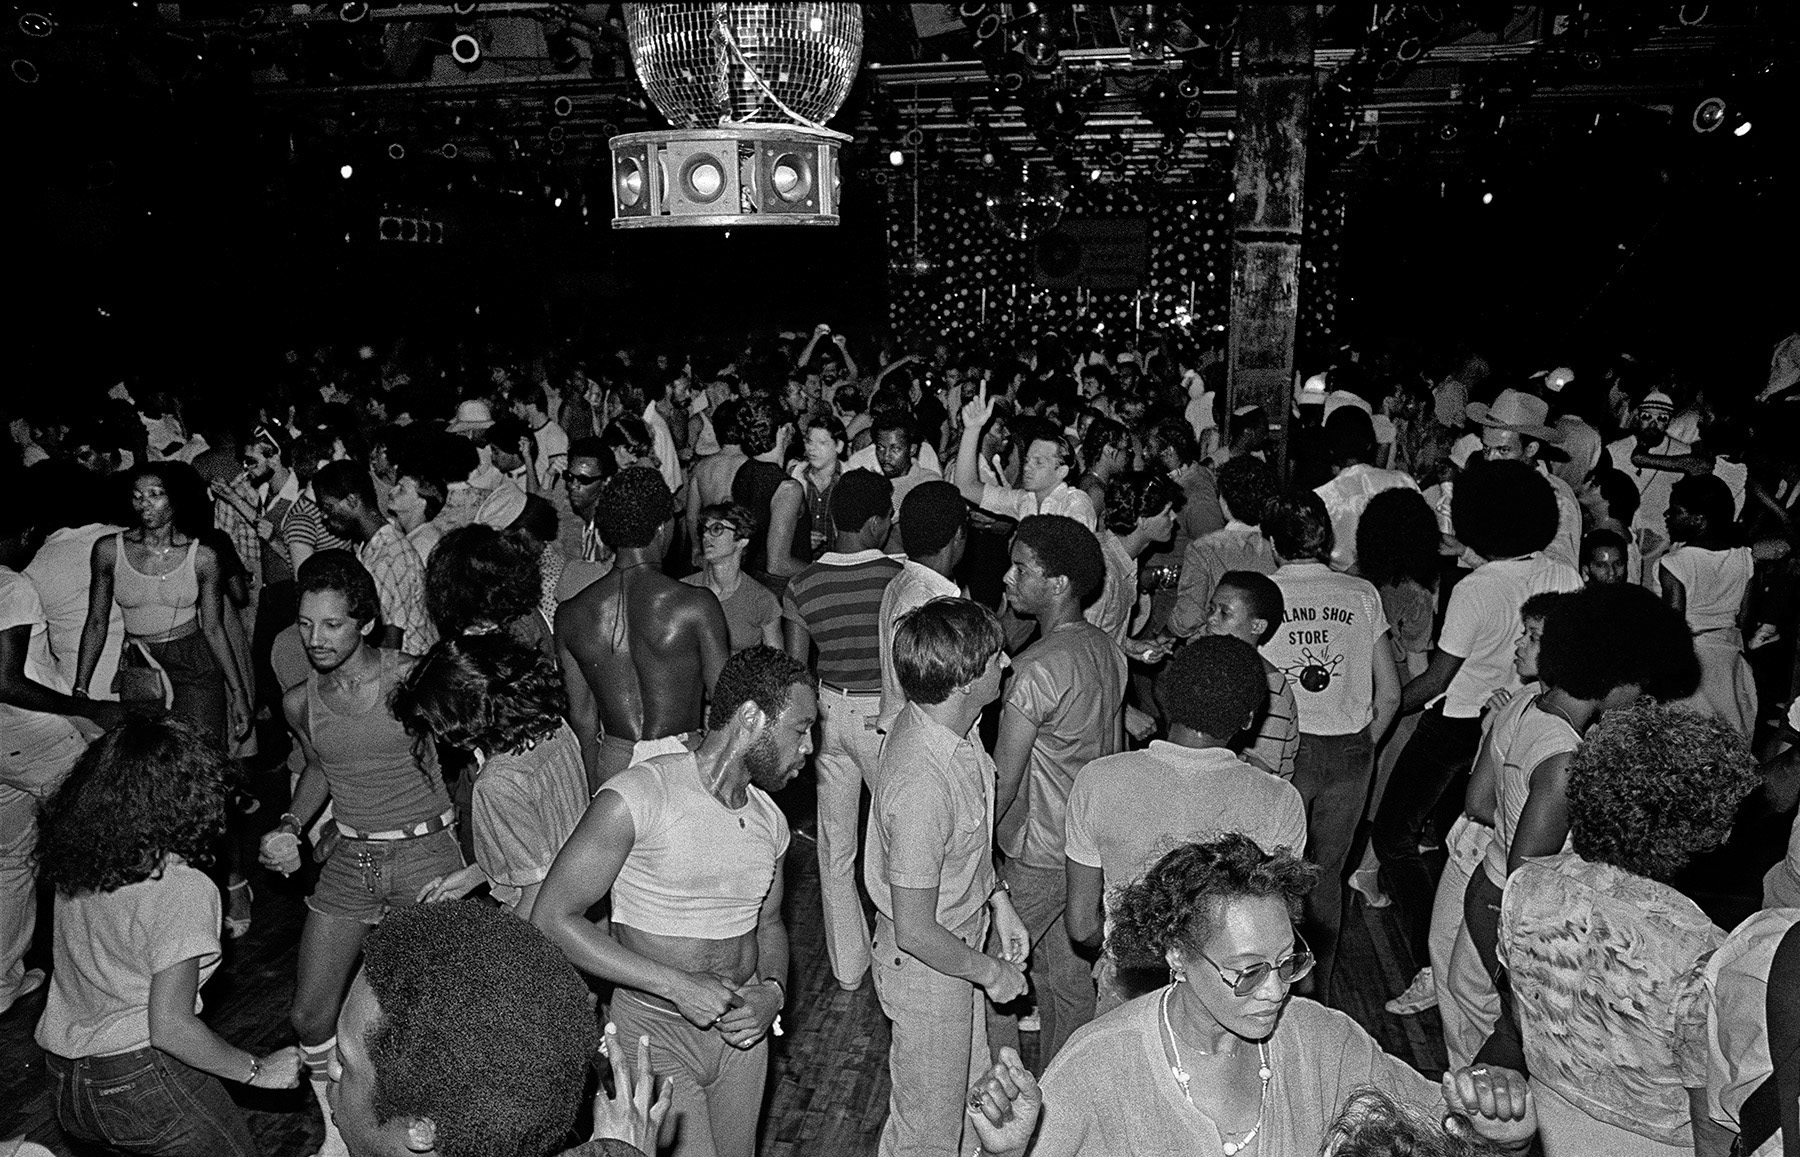 Studio 54 reveals never-before-seen photos and pixel art NFTs of the famous disco club 